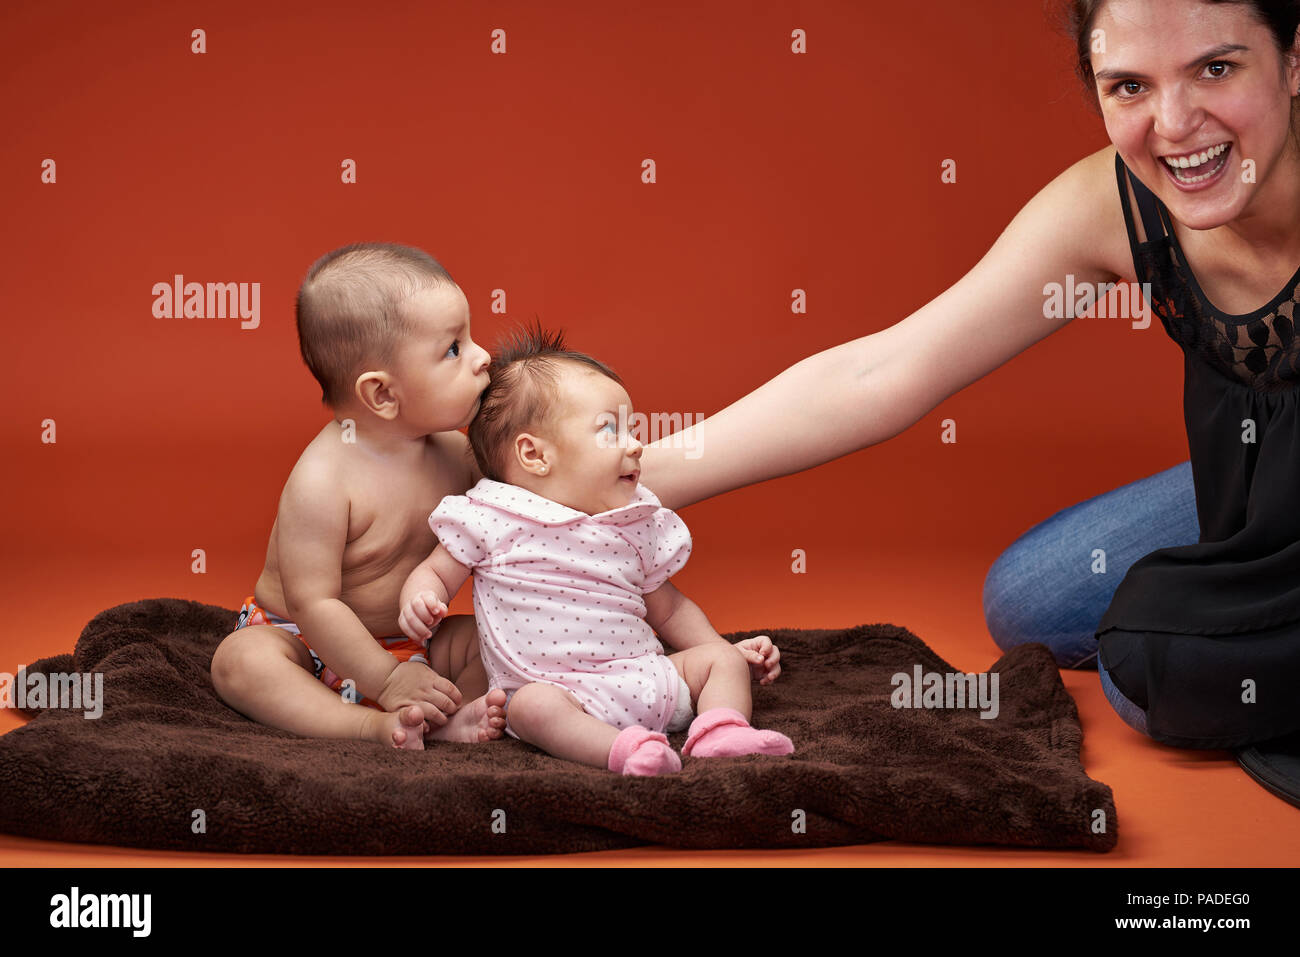 Two small kids look at smiling momin syudio background Stock Photo